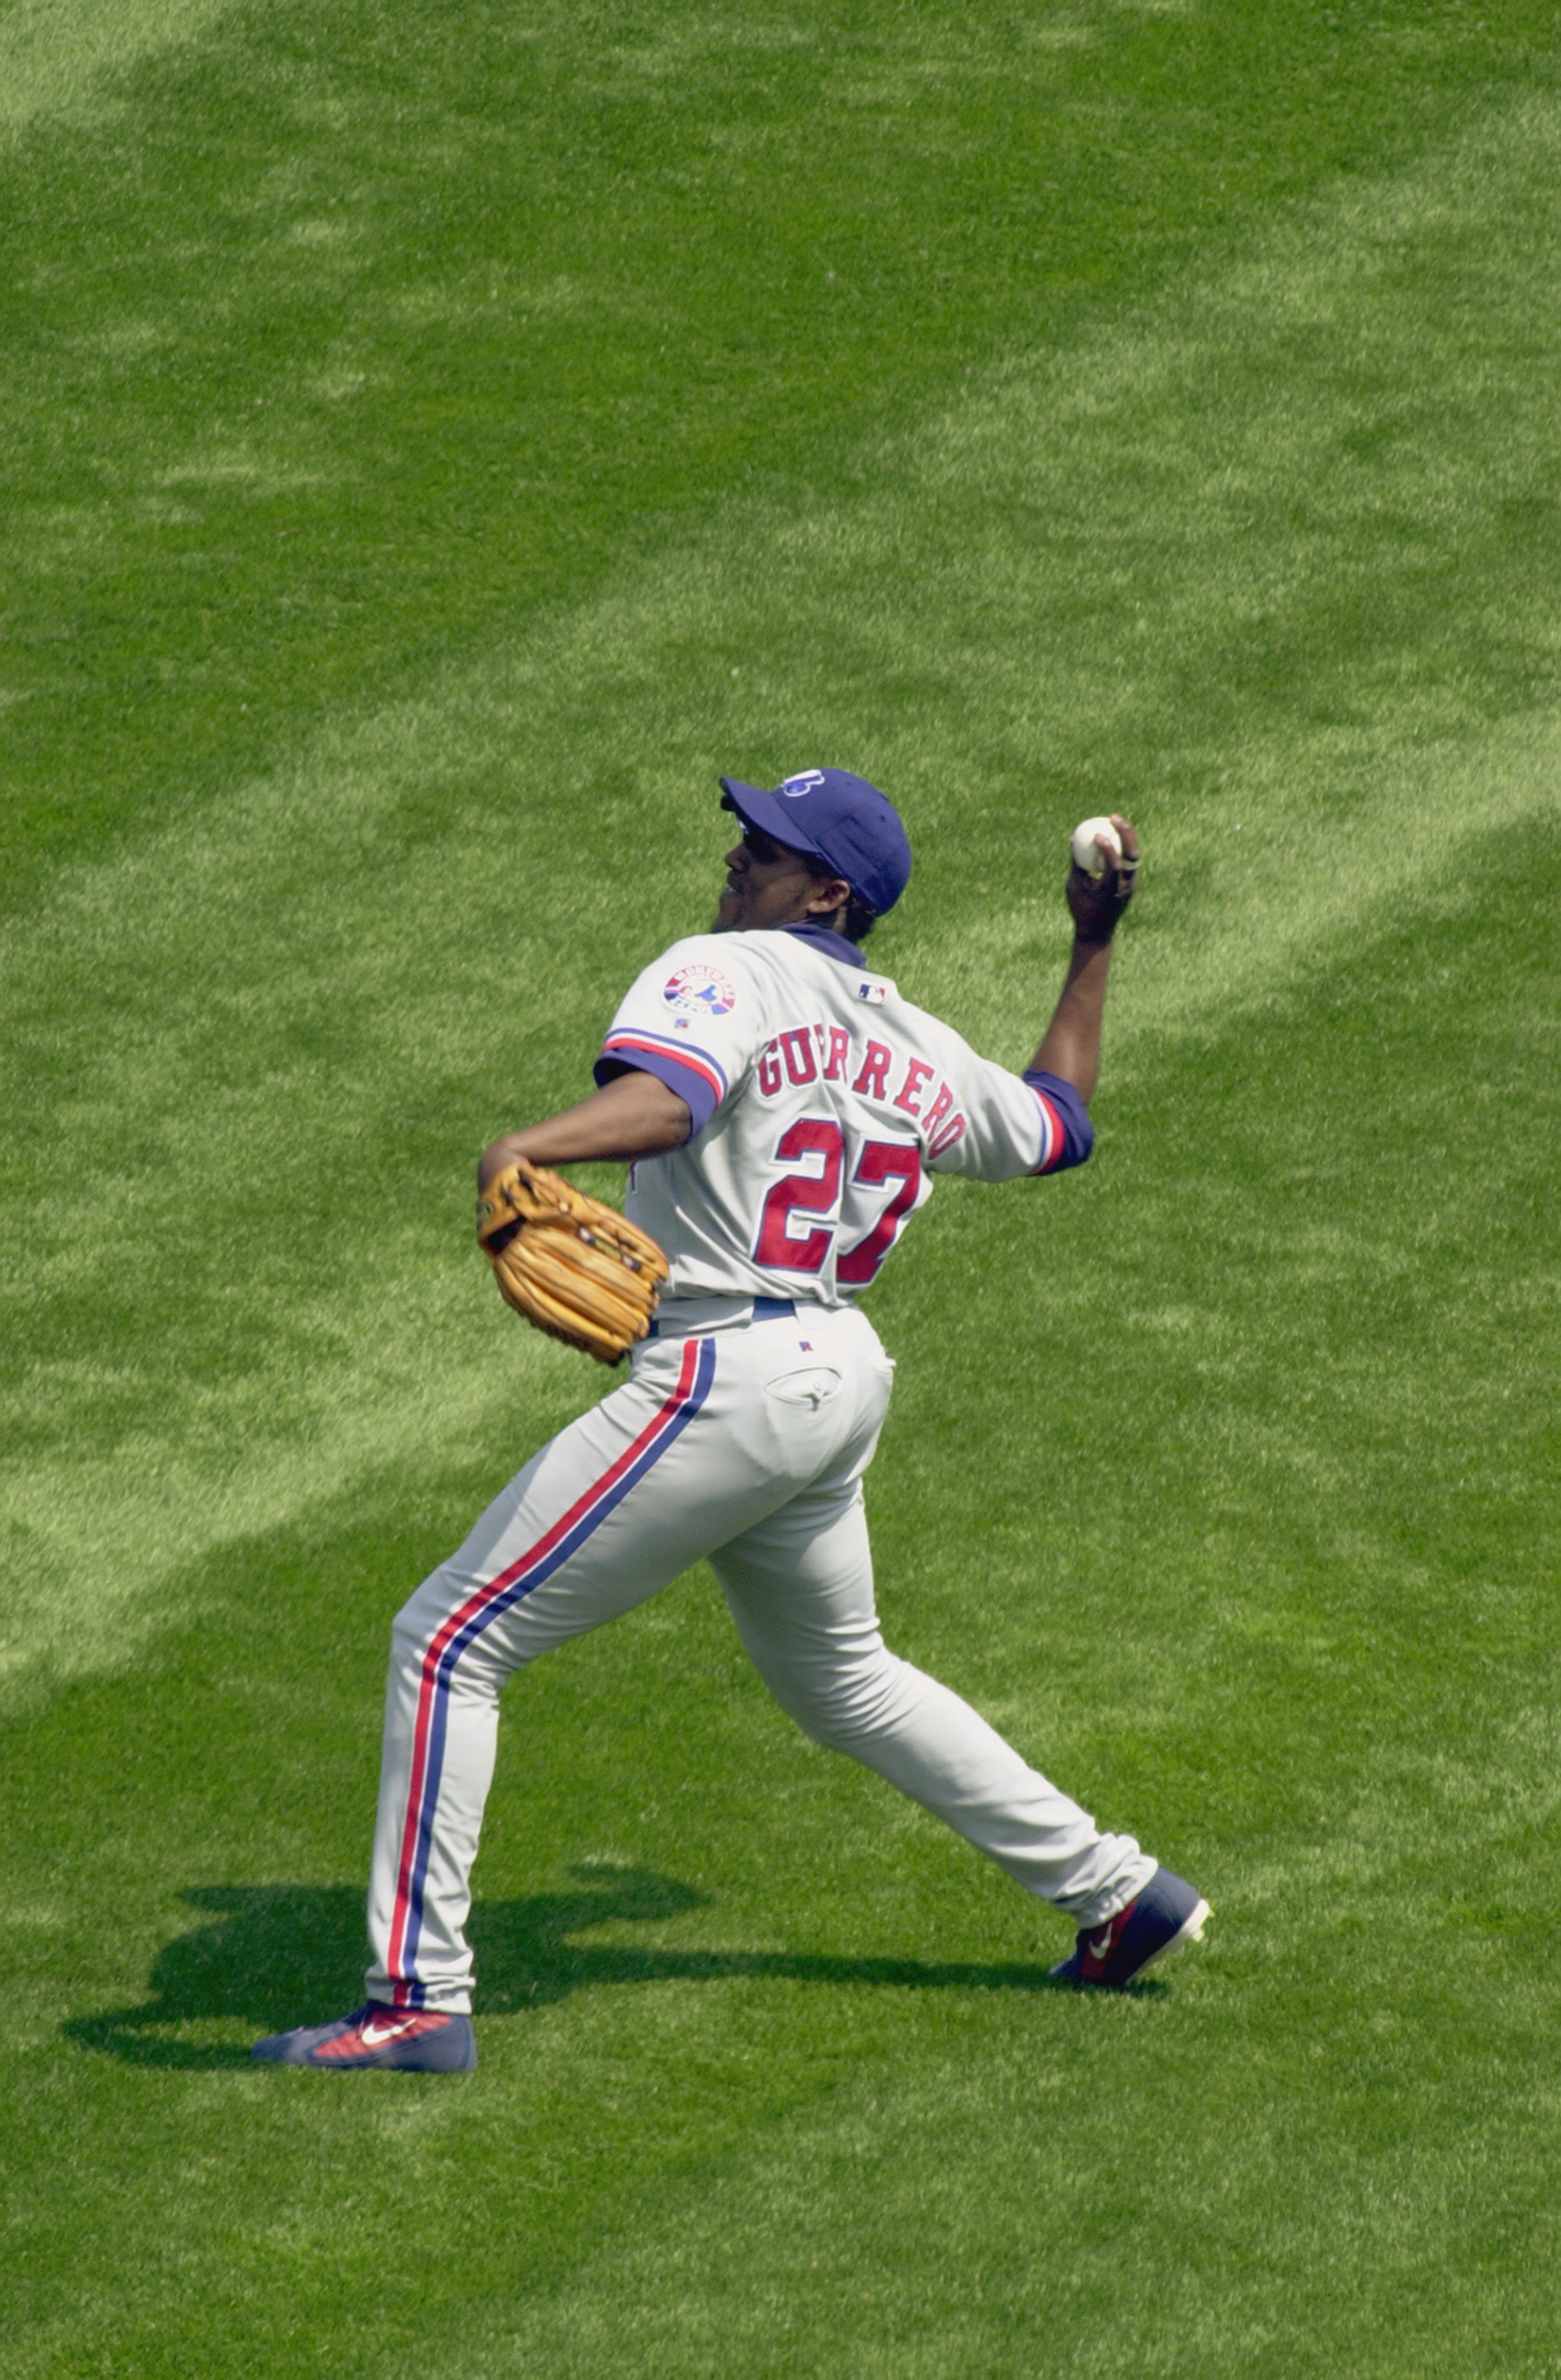 CHICAGO-JUNE 9:  Right fielder Vladimir Guerrero #27 of the Montreal Expos throws the ball back to the infield during the Interleague MLB game against the Chicago White Sox on June 9, 2002 at Comiskey Park in Chicago, Illinois. The White Sox won 13-2.  (P